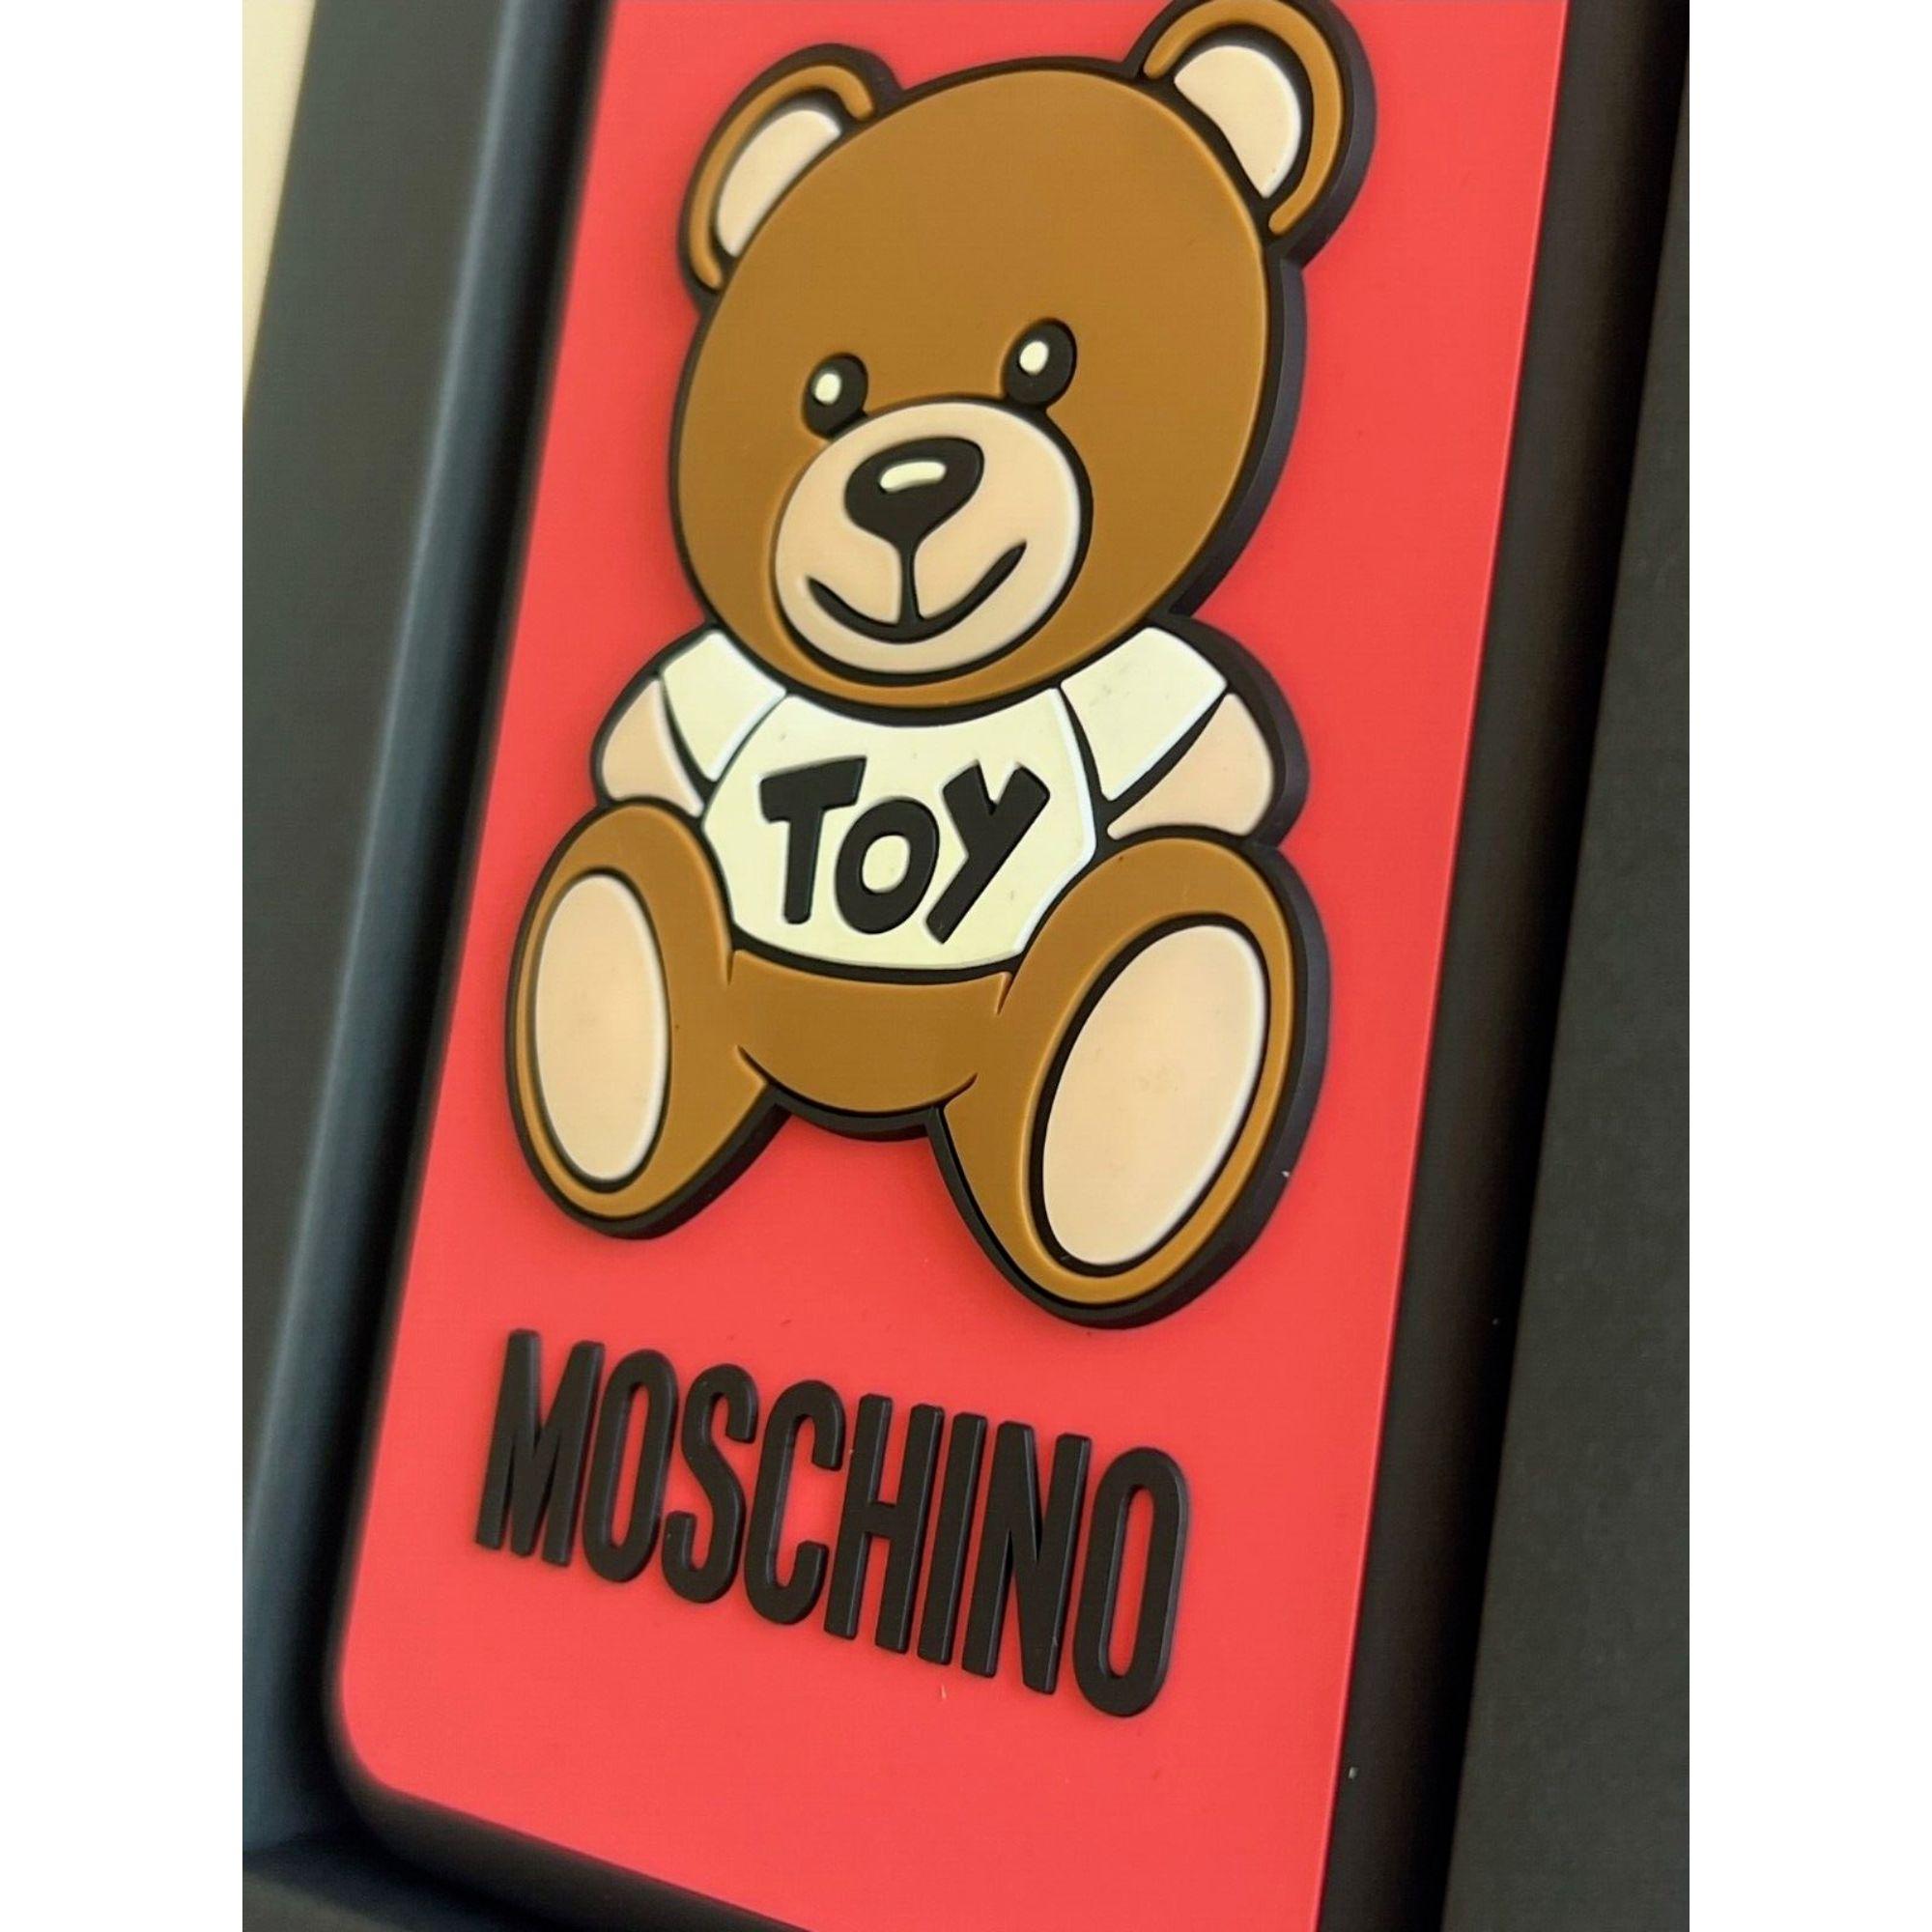 SS21 Moschino Couture Red iPhone XS Max Case with Teddy Bear Toy by Jeremy Scott For Sale 2